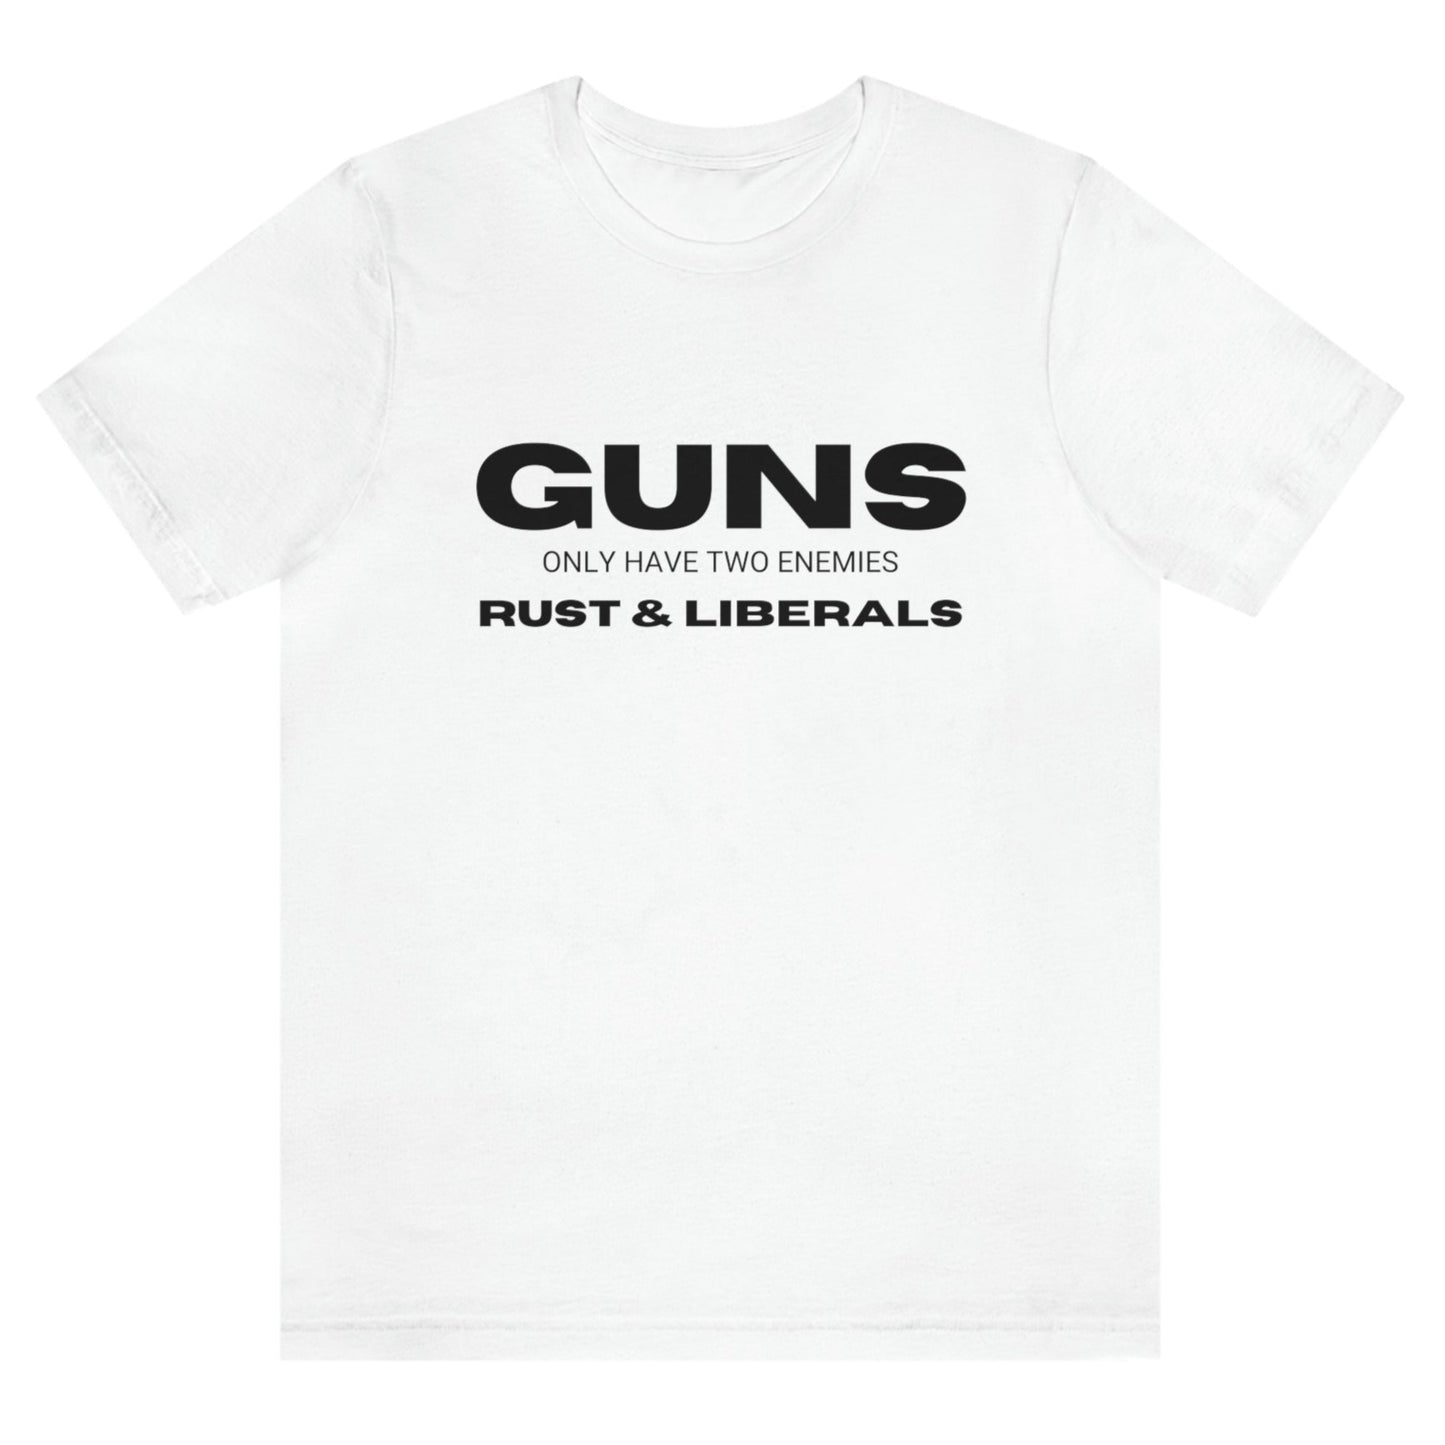 guns-only-have-two-enemies-rust-and-liberals-white-t-shirt-2a-second-amendment